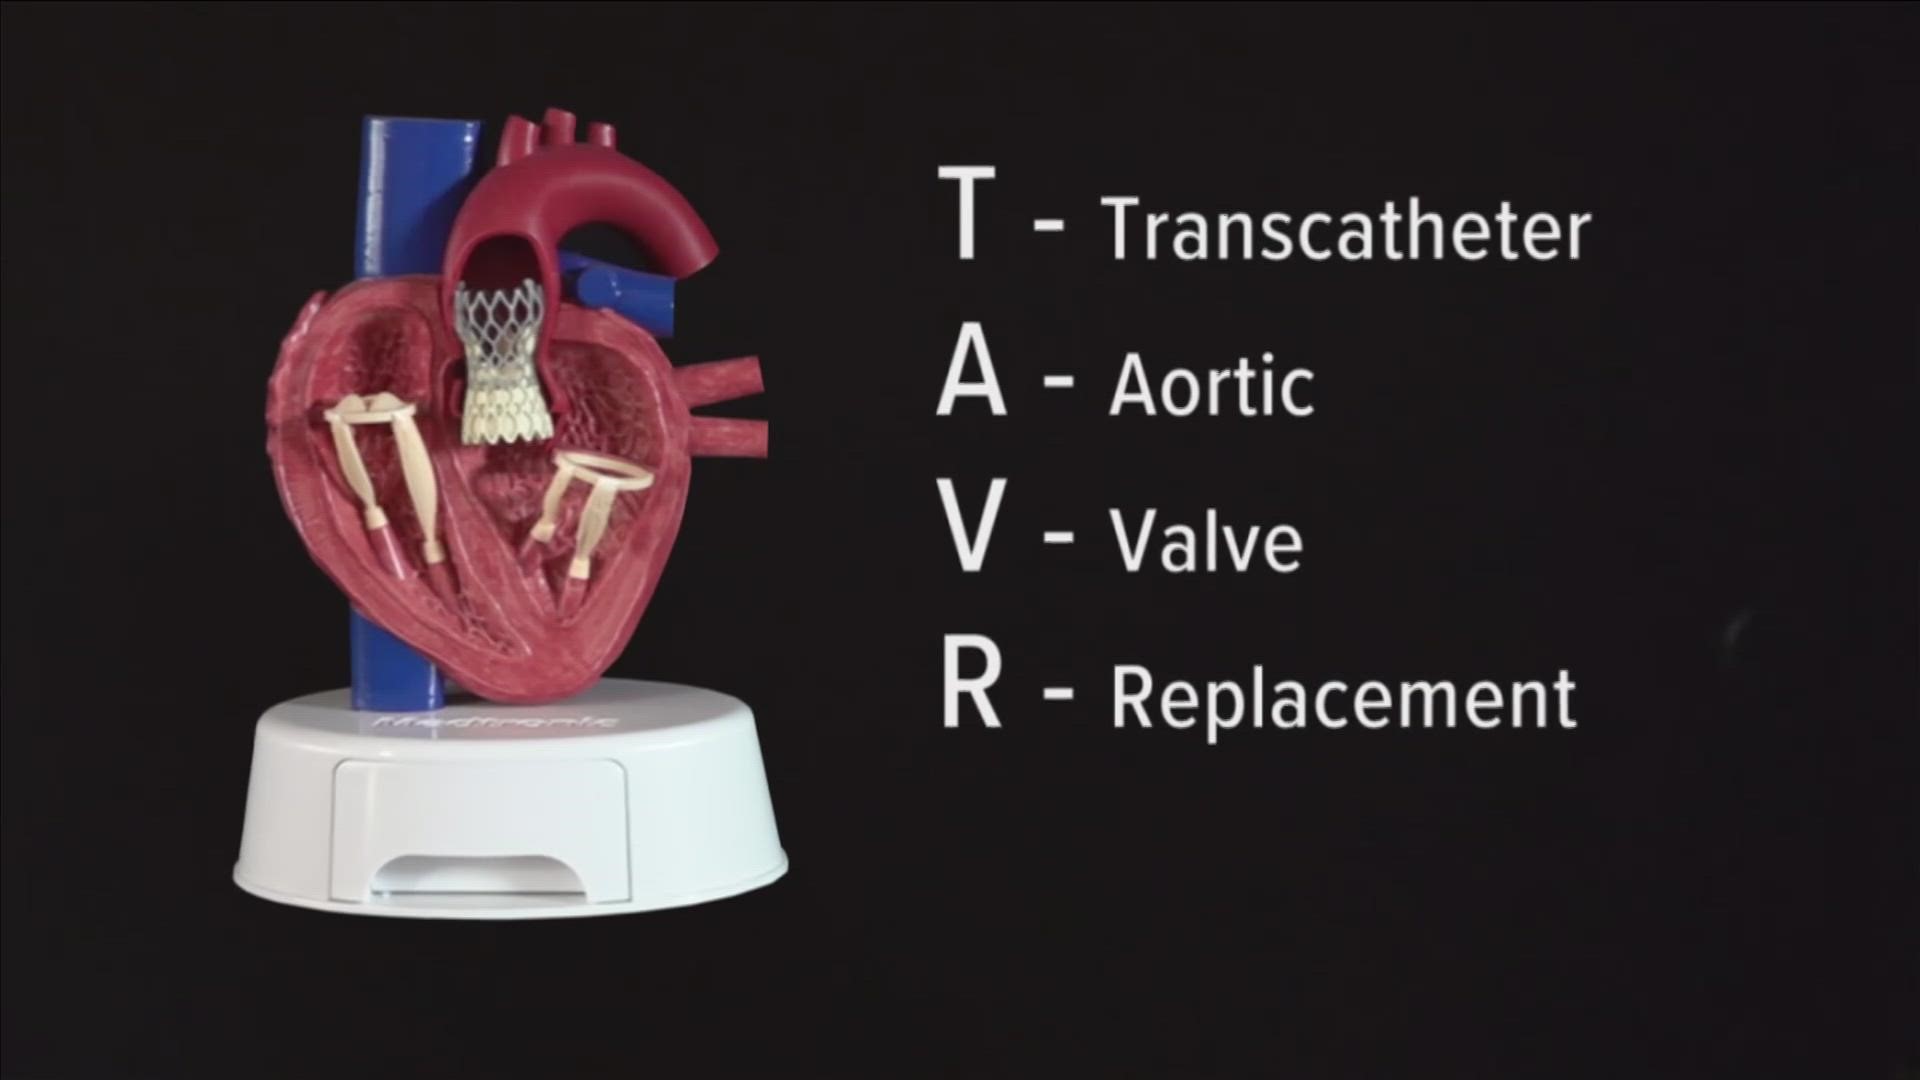 Saint Francis Hospital is helping patients using TAVR (Trans Aortic Valve Replacement), which repairs Aortic Stenosis, a hardening of the aortic valve.